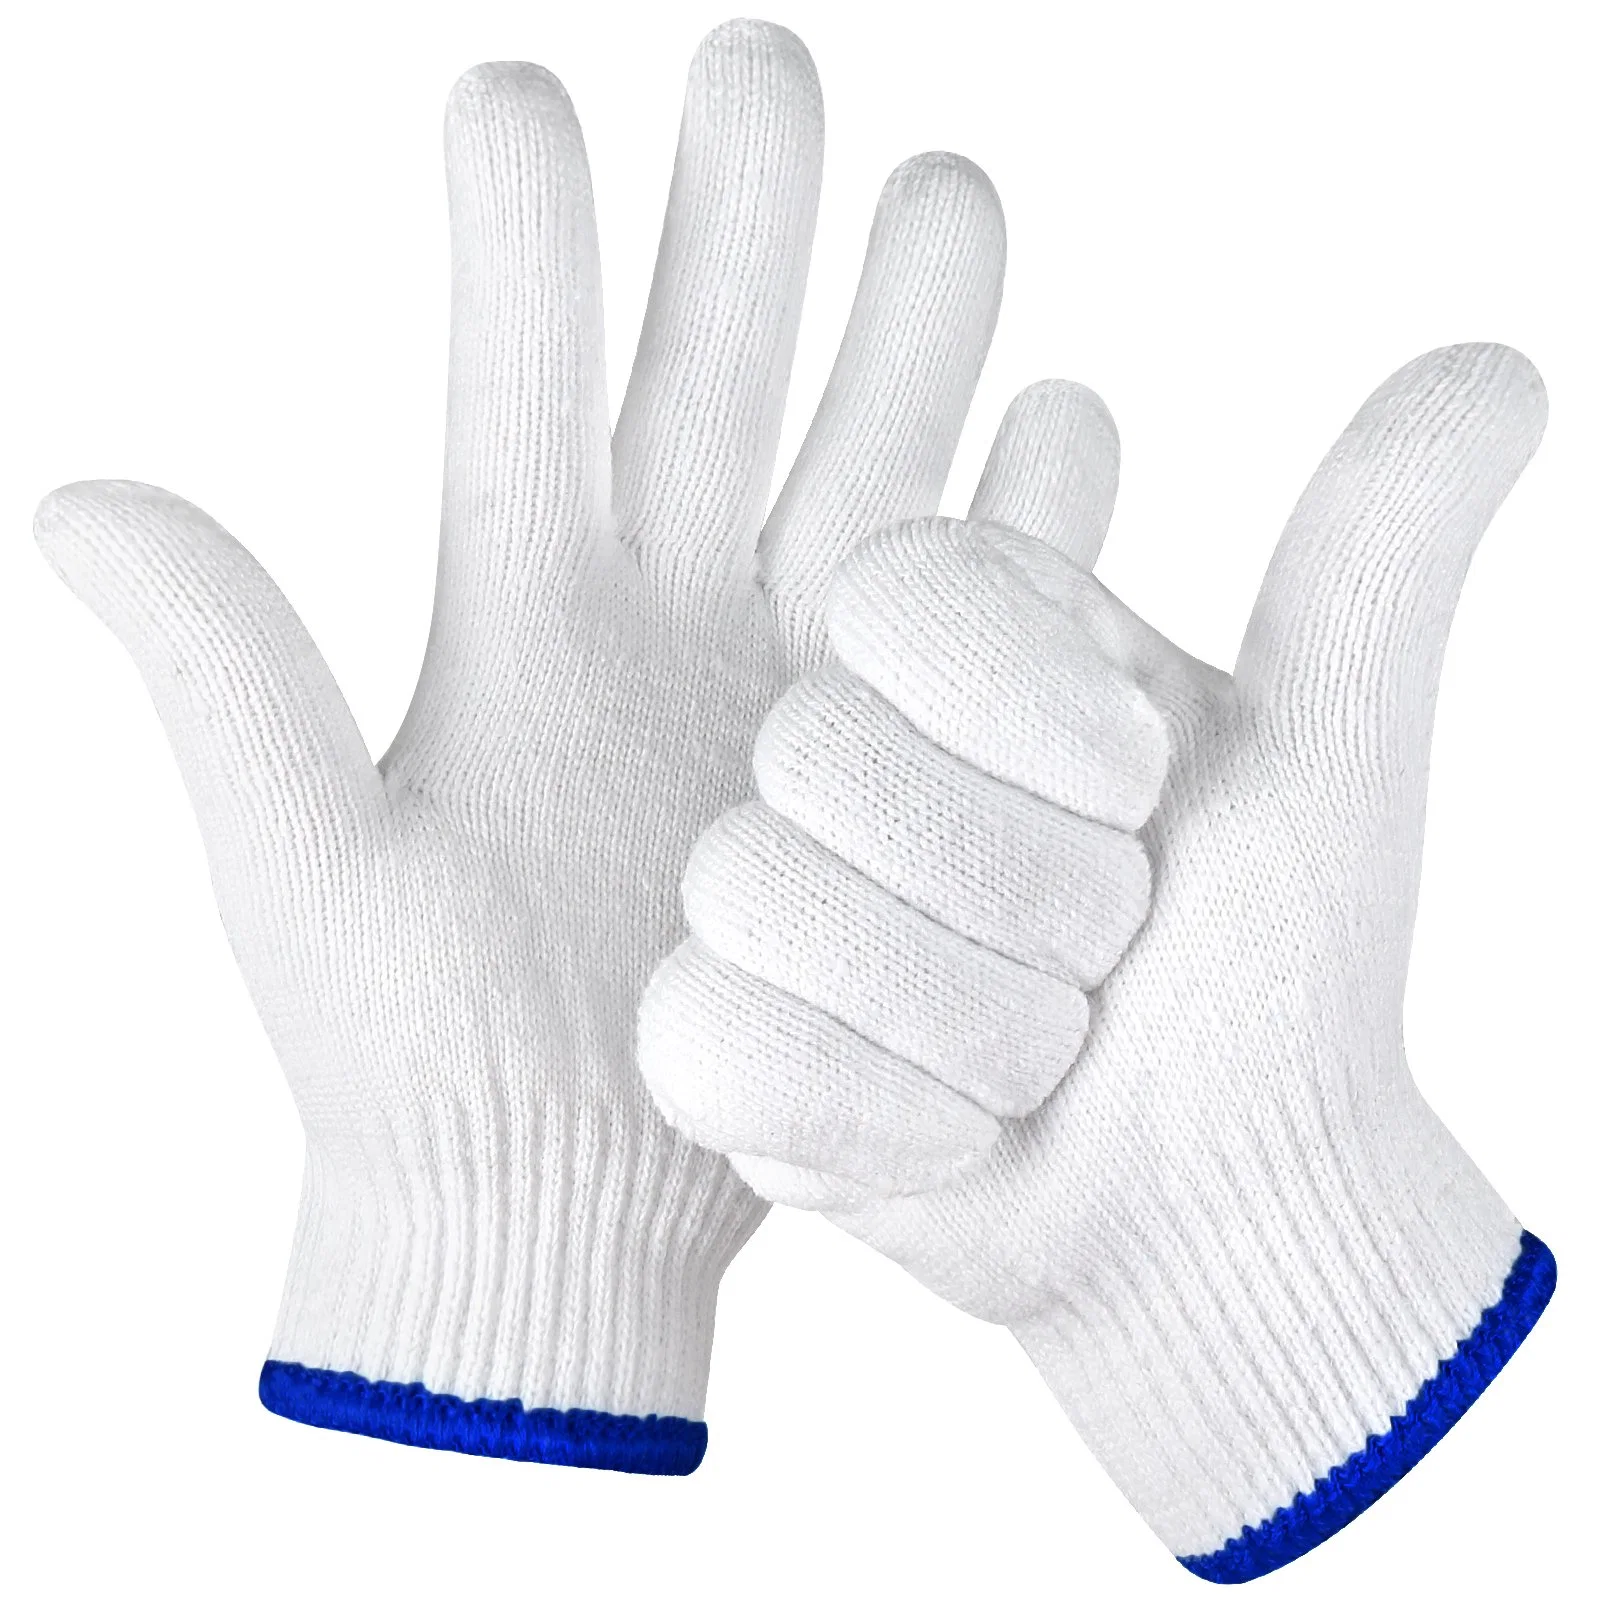 China Wholesale/Supplier 7/10gauge White Mittens Safety/Work Glove Working Guantes Cotton Knitted Gloves